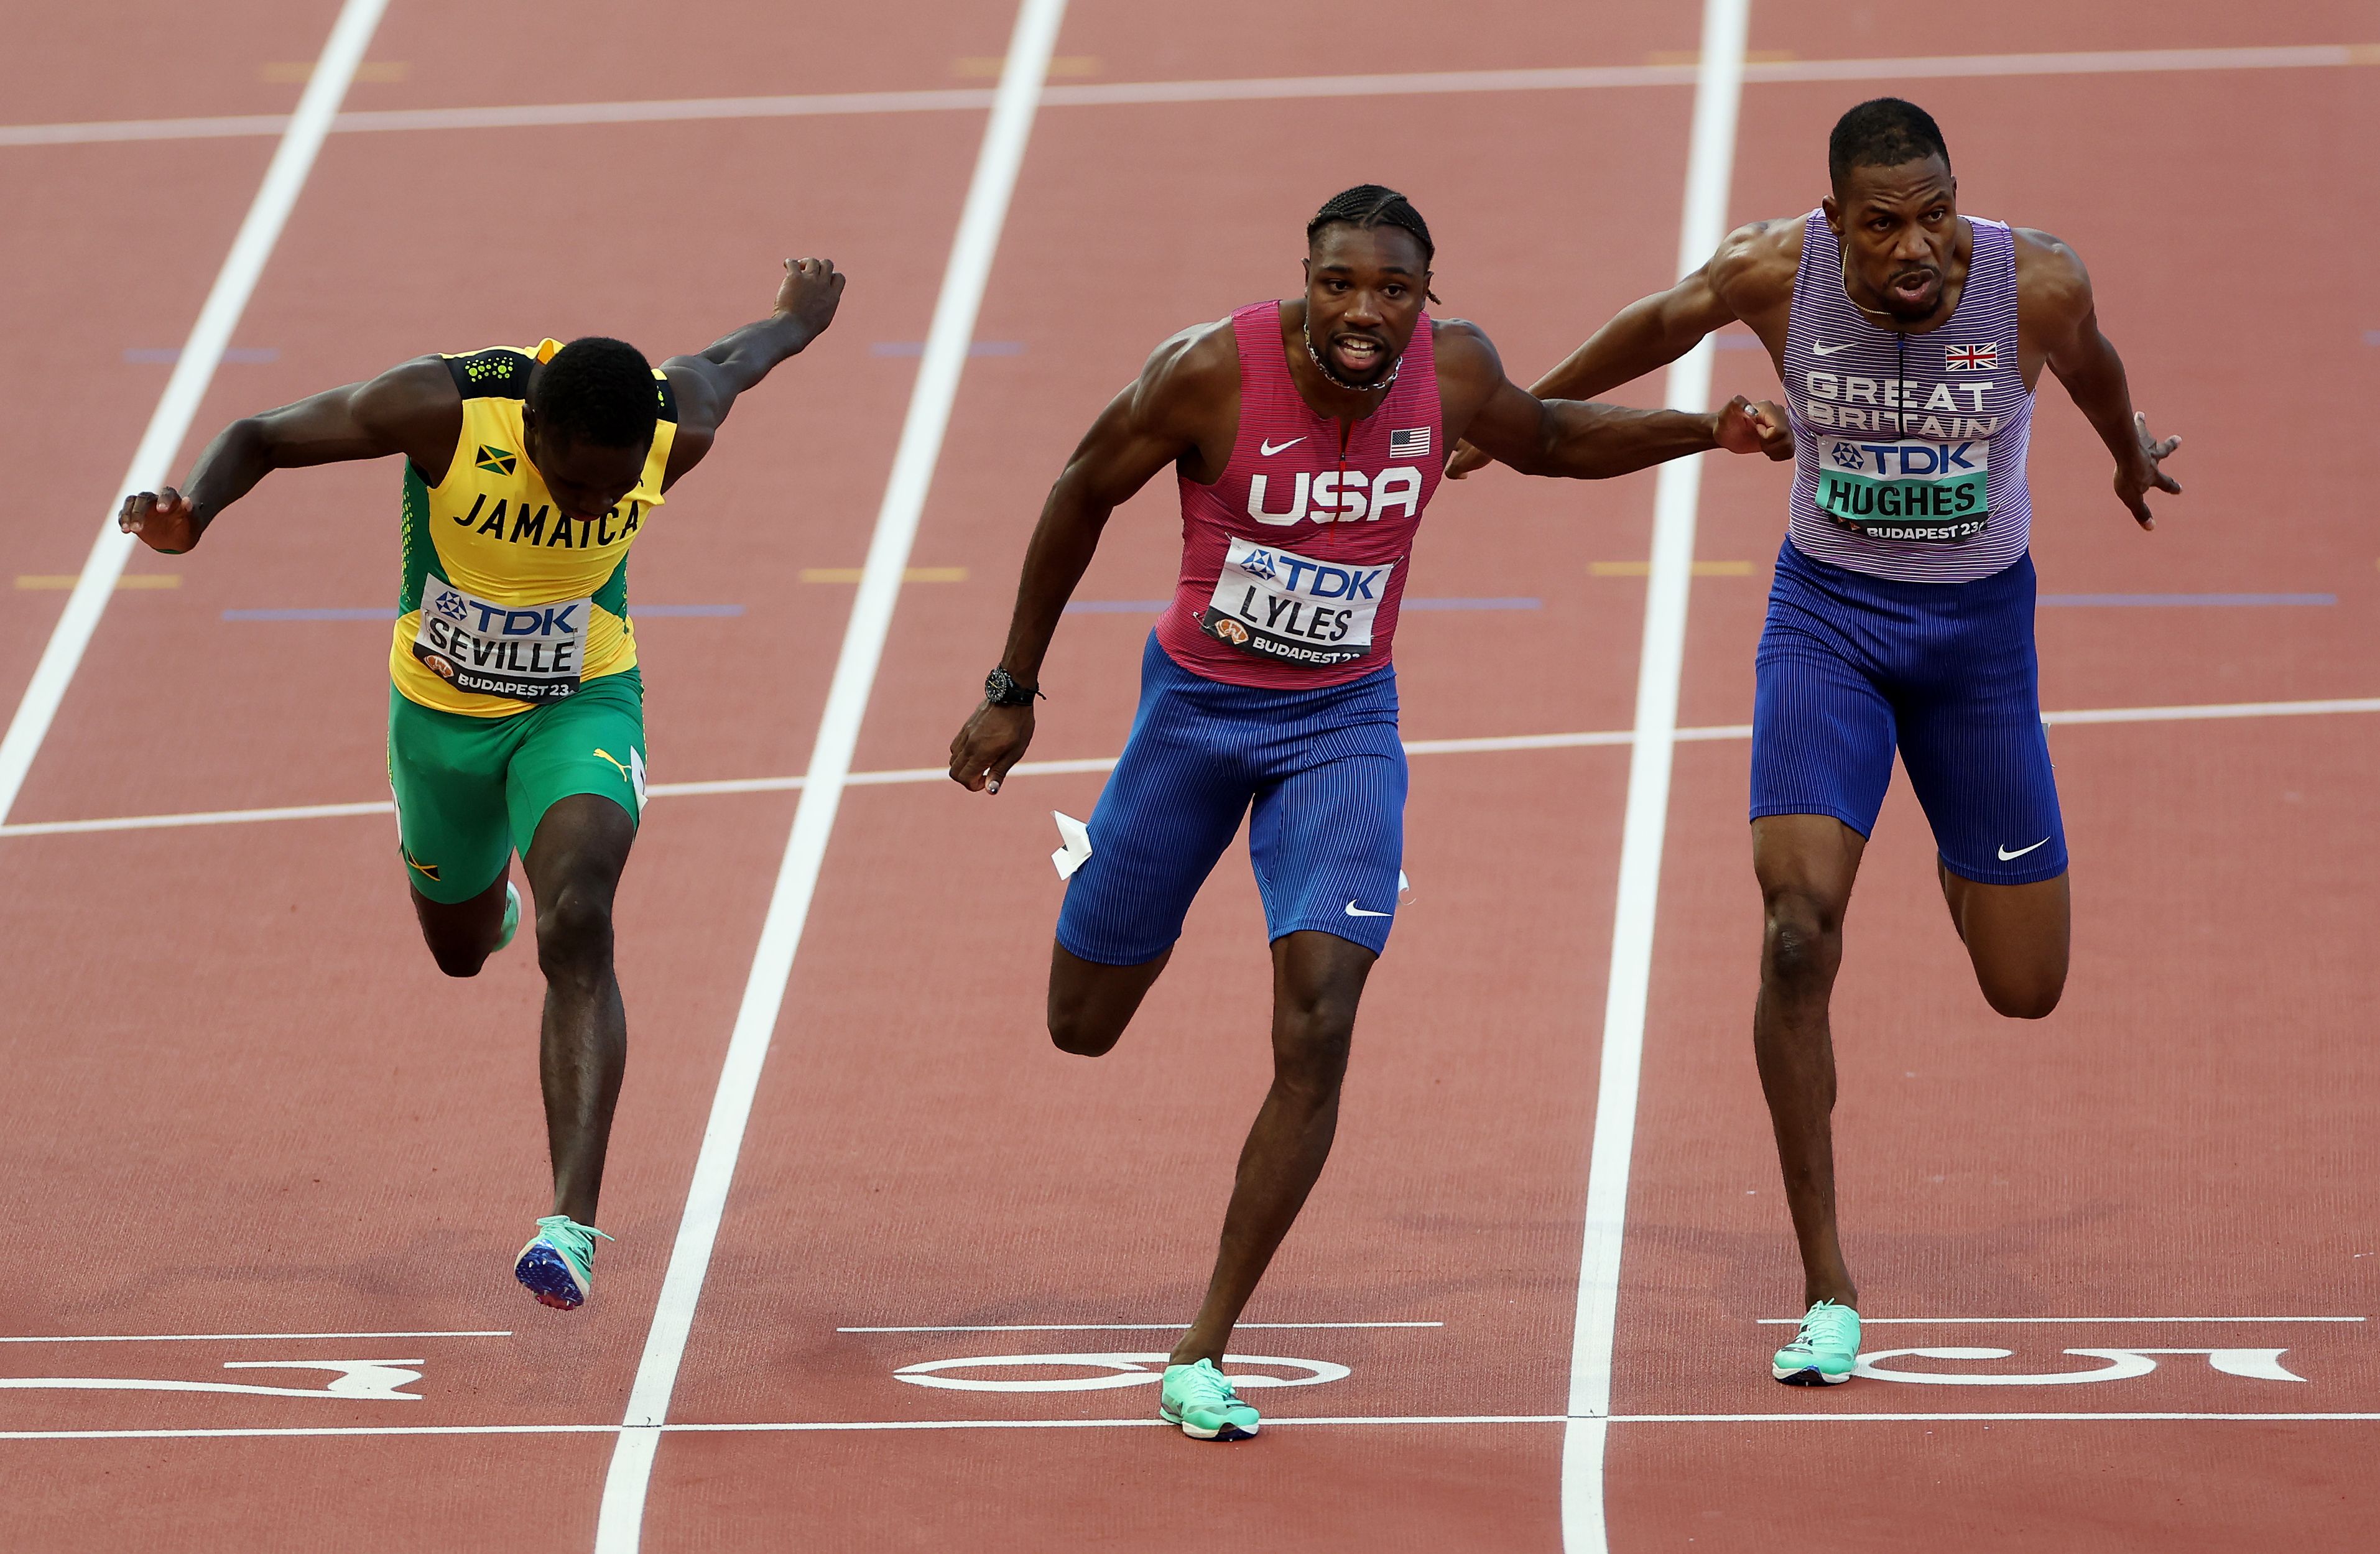 Noah Lyles wins the 100m at the World Athletics Championships Budapest 23